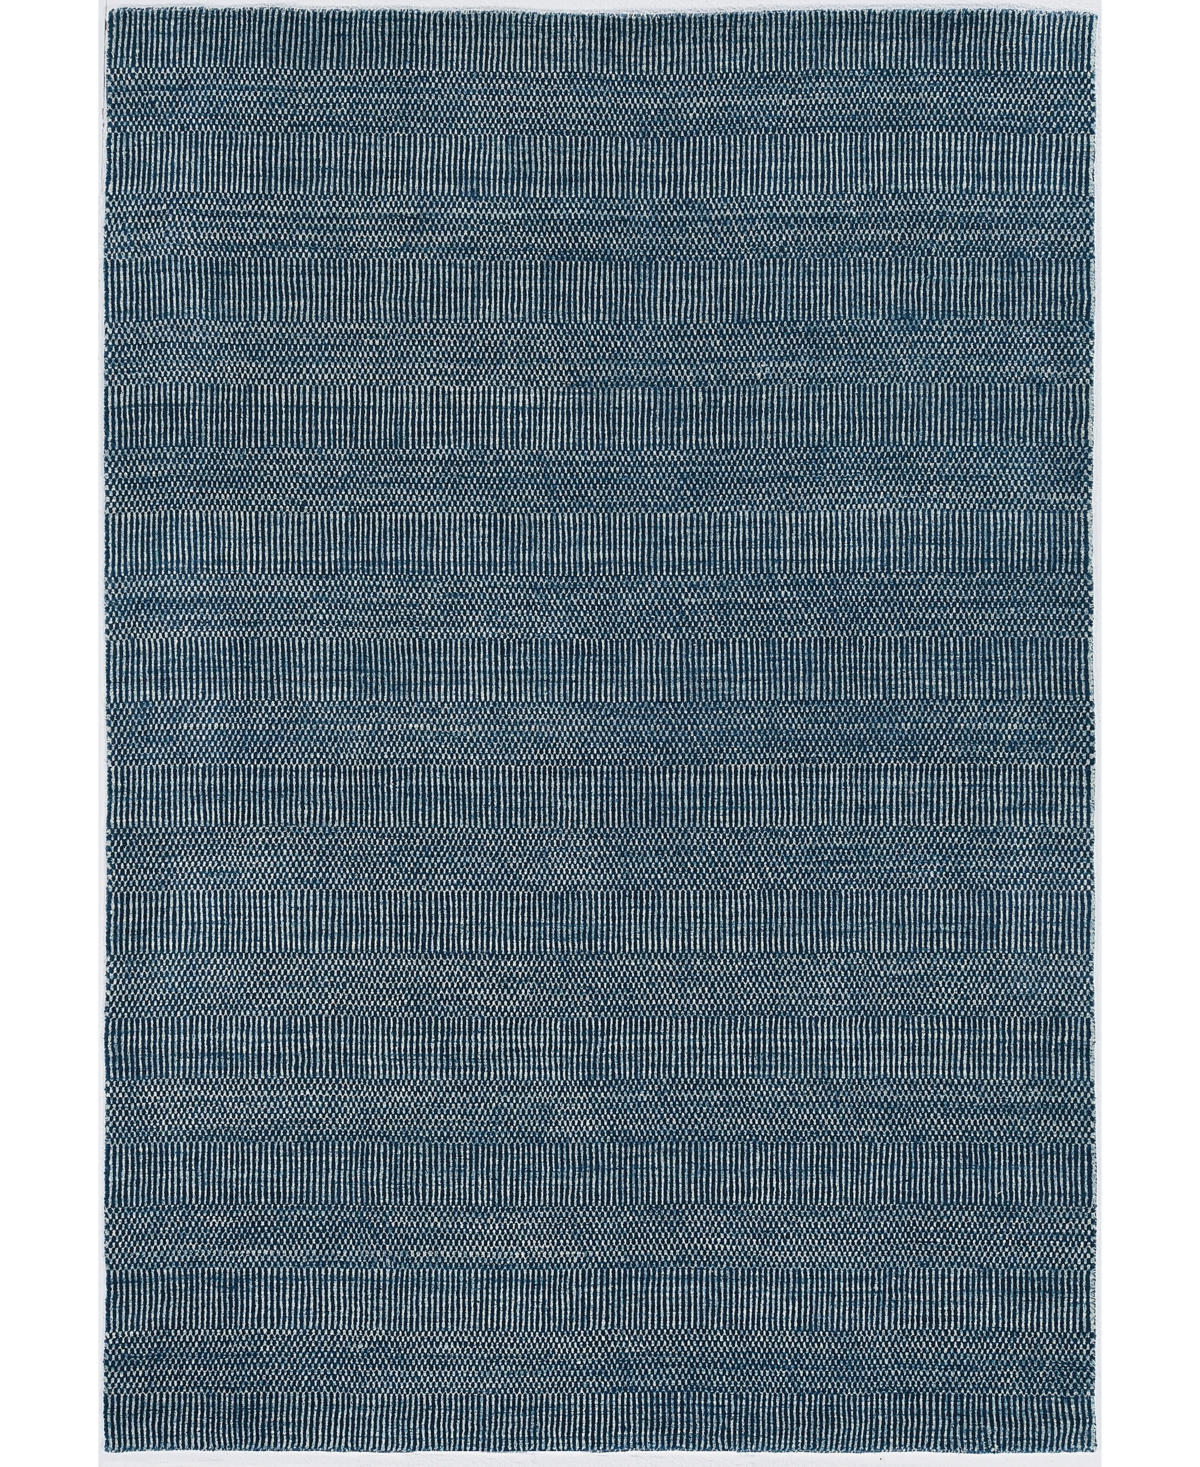 Km Home Alleanza 200 9' X 12' Area Rug In Teal